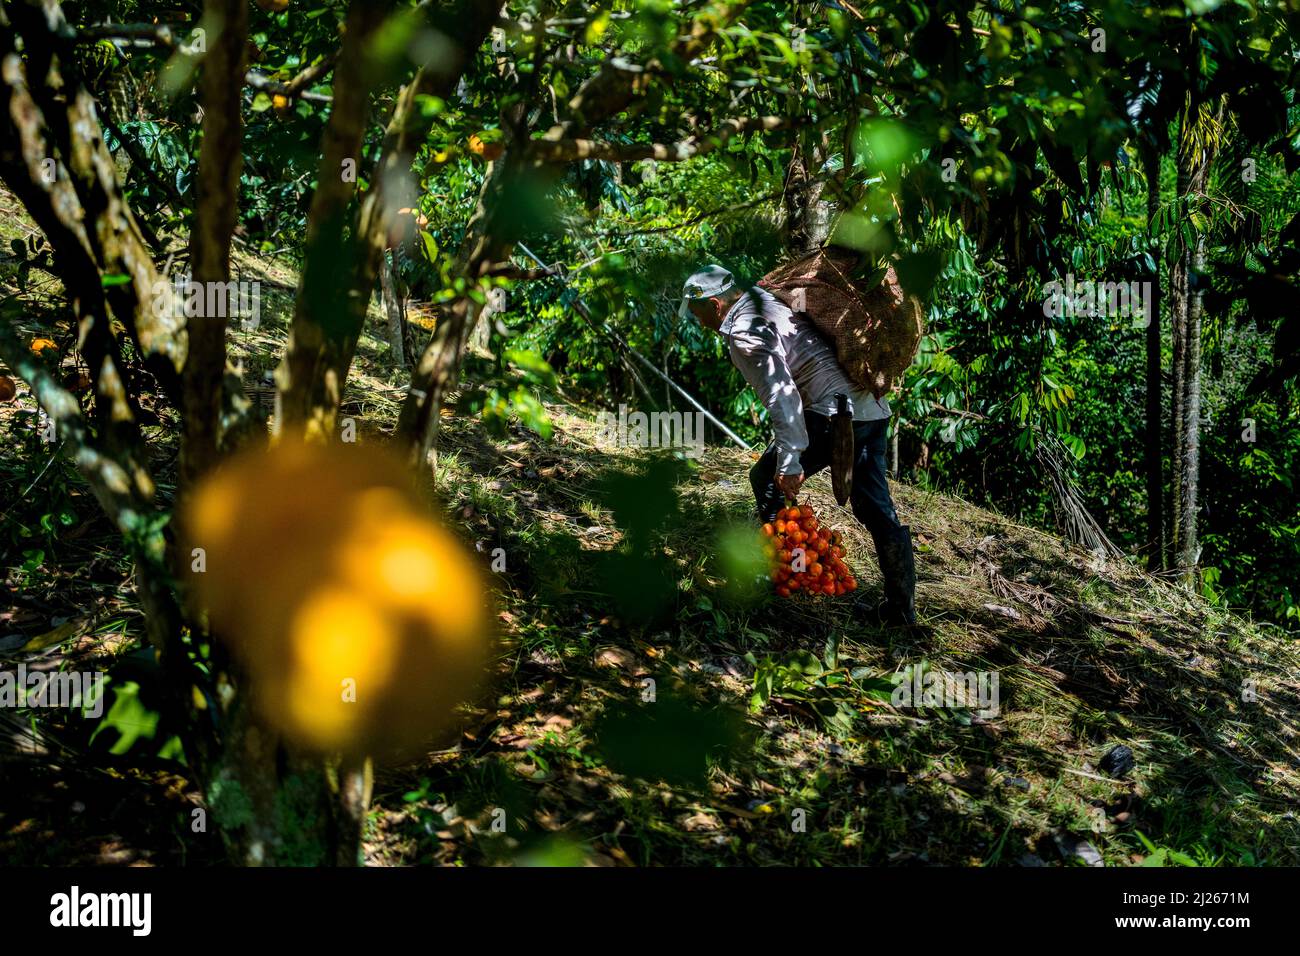 A Colombian farmer carries freshly harvested bunches of chontaduro (peach palm) fruits on a farm near El Tambo, Cauca, Colombia. Stock Photo